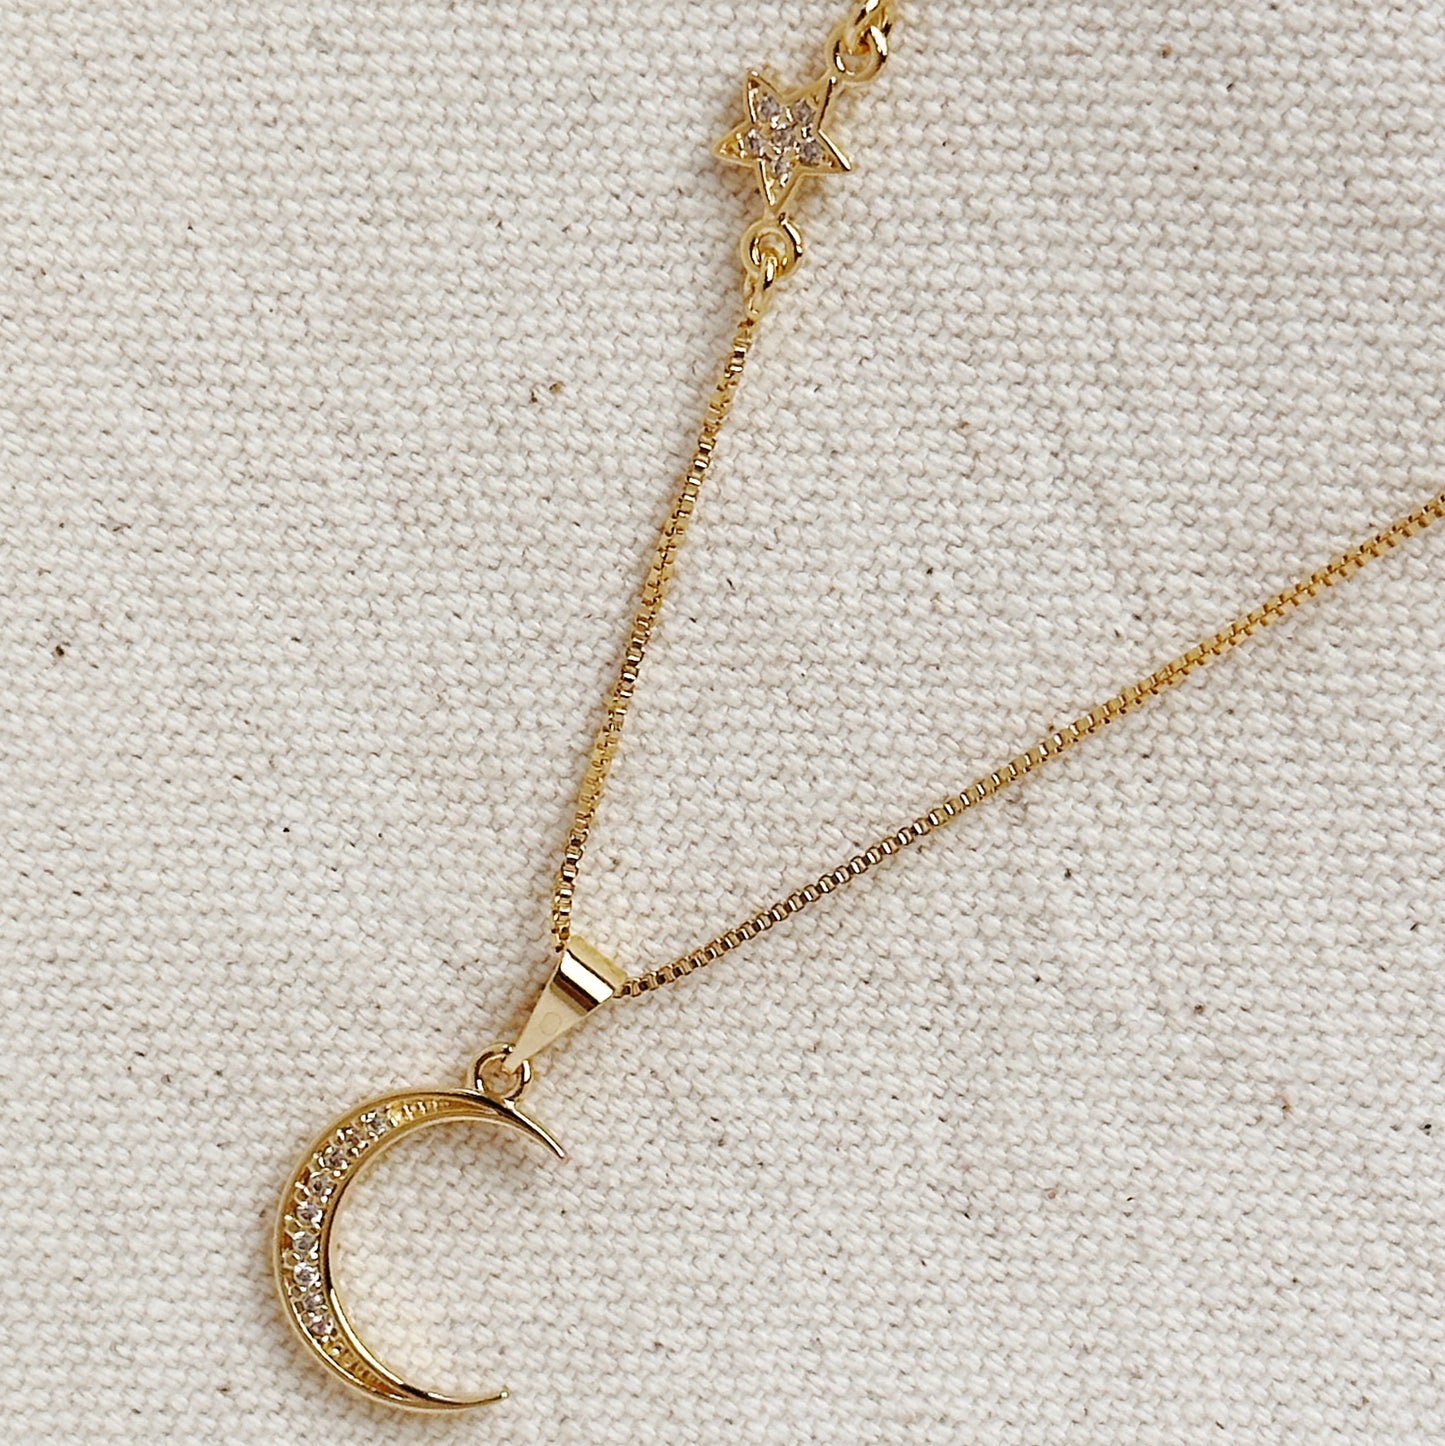 Moon and Star Necklace 18k Gold Filled